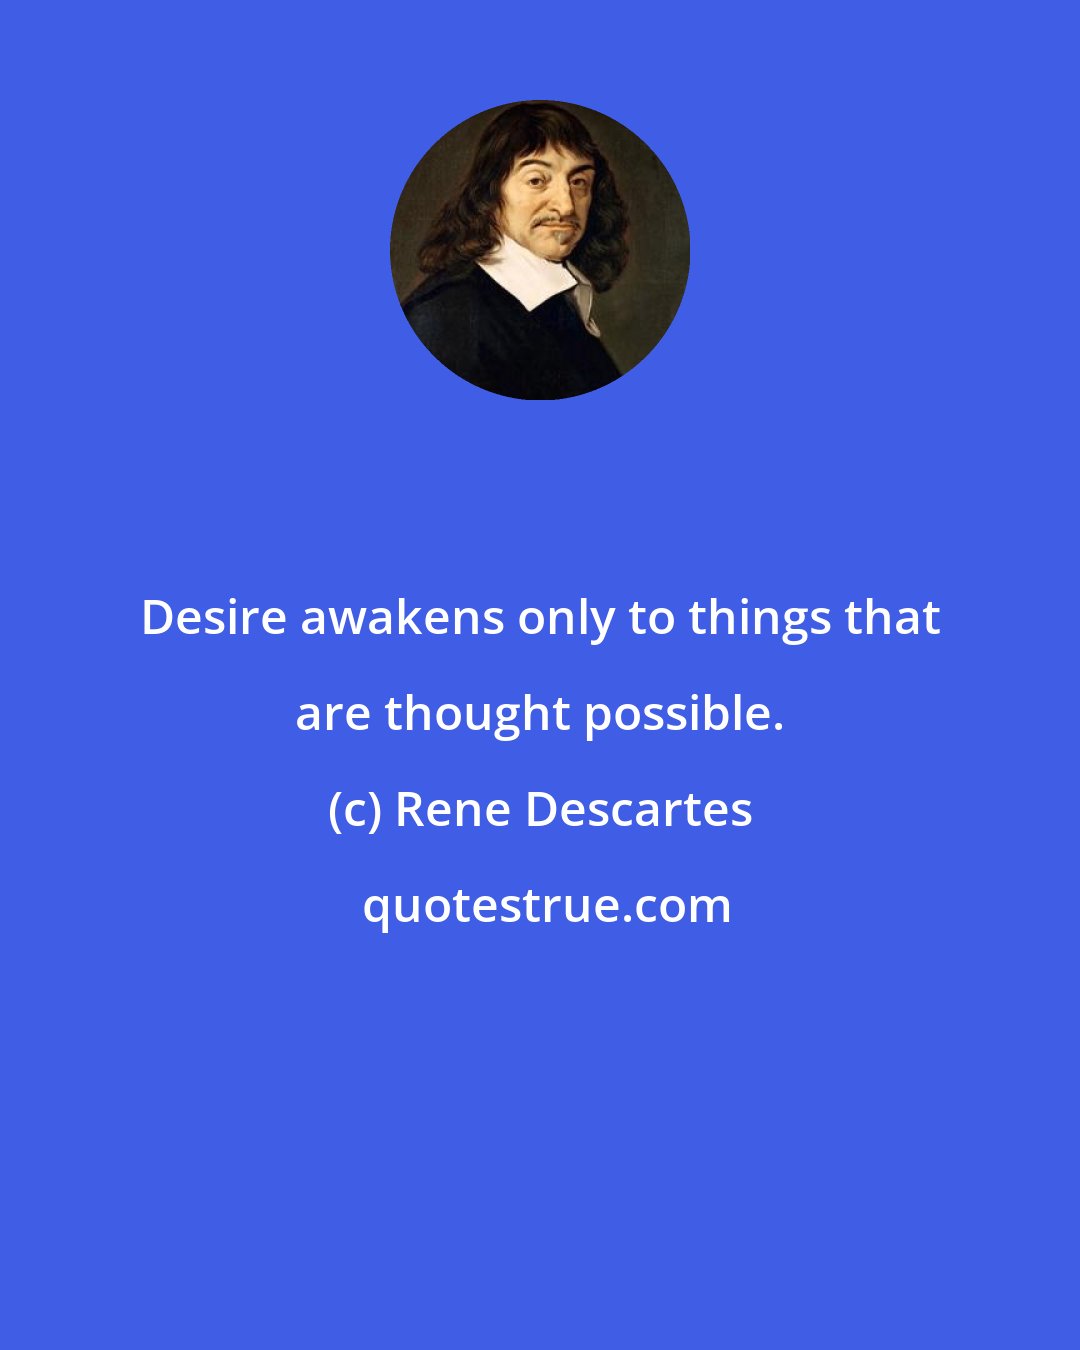 Rene Descartes: Desire awakens only to things that are thought possible.